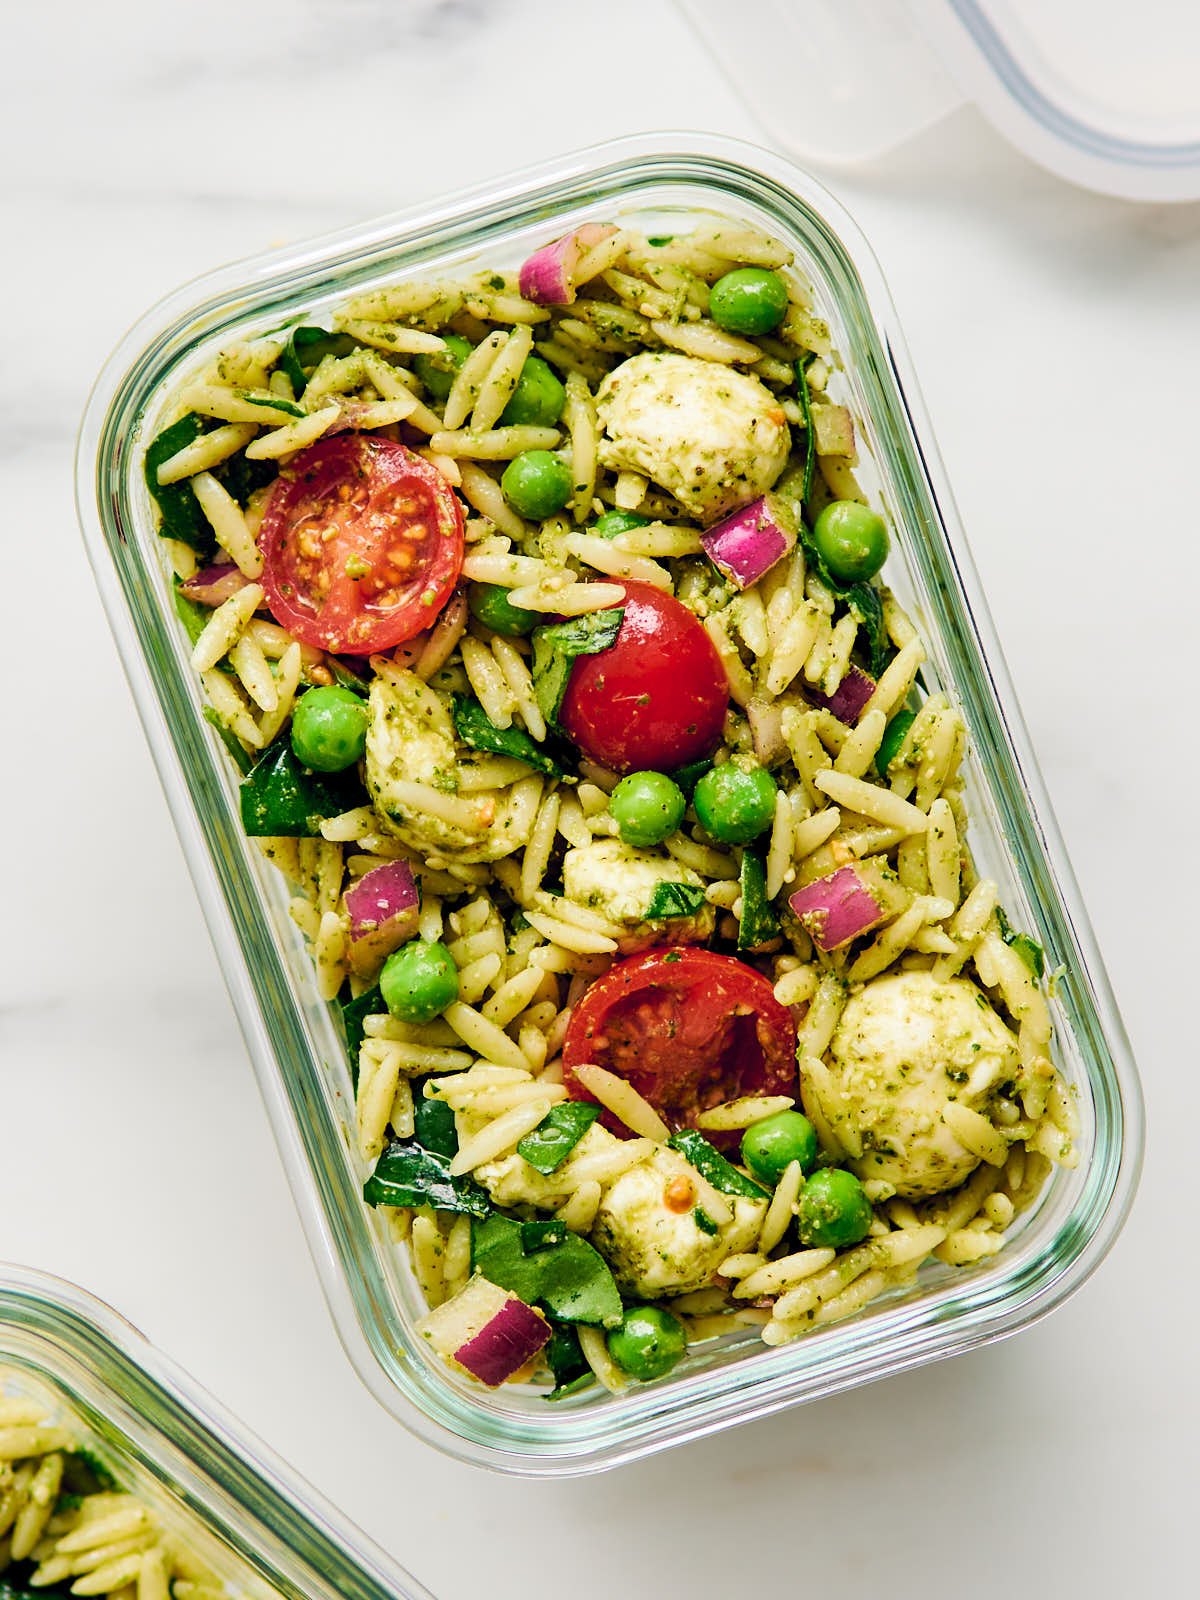 Leftover Orzo Pesto Salad stored in a glass container for meal prep.